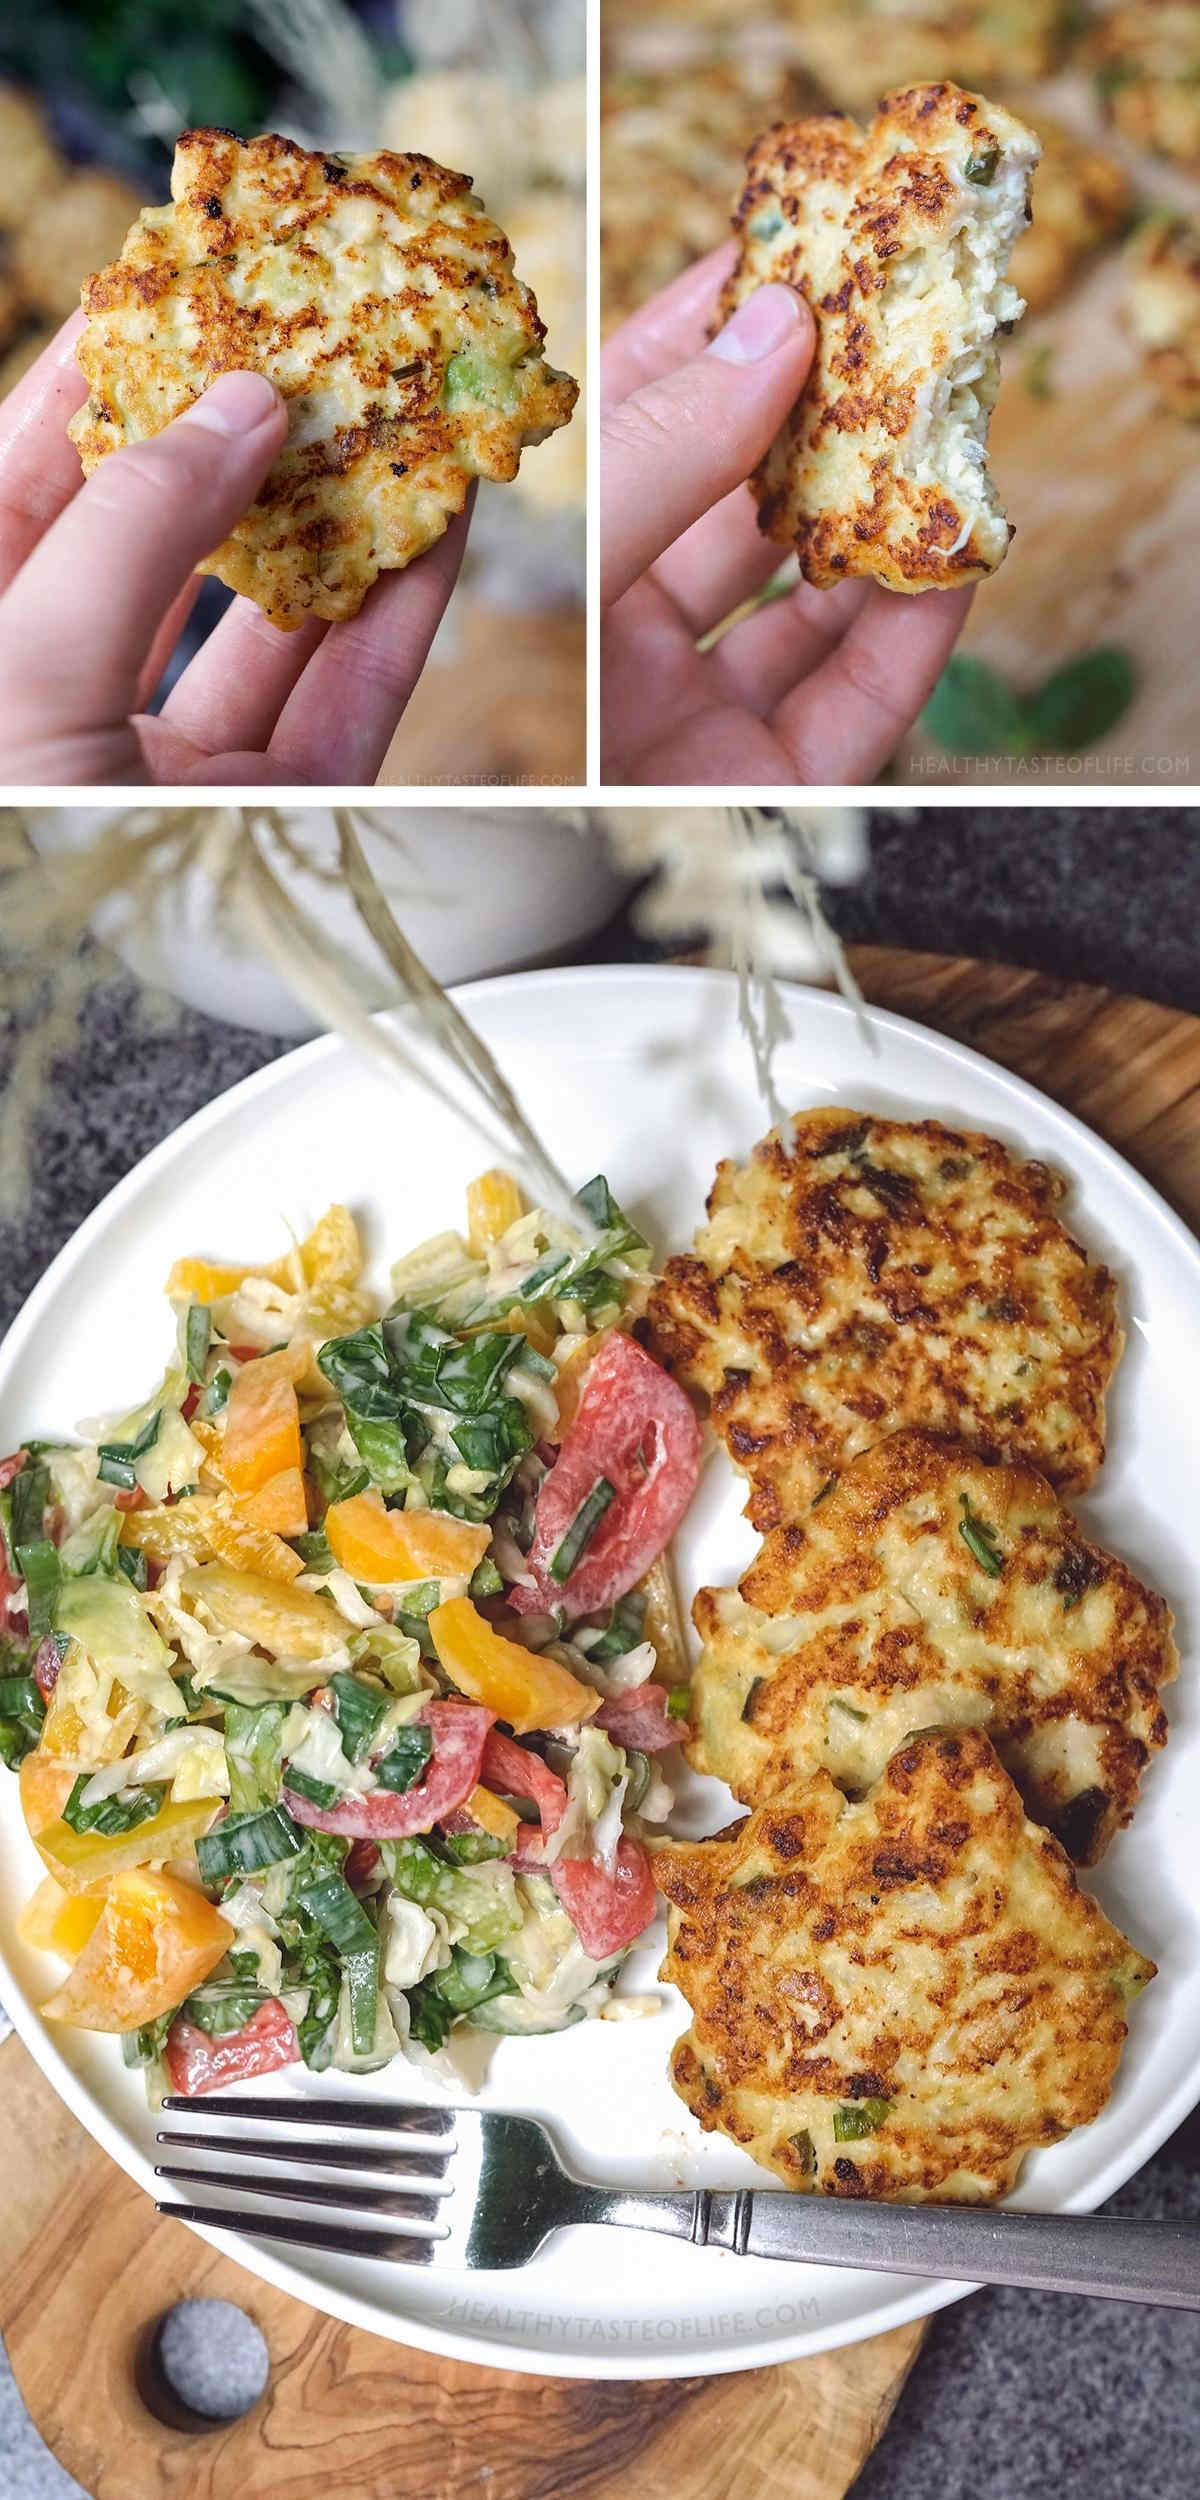 How to serve the chicken fritters, by them selves or with a salad.